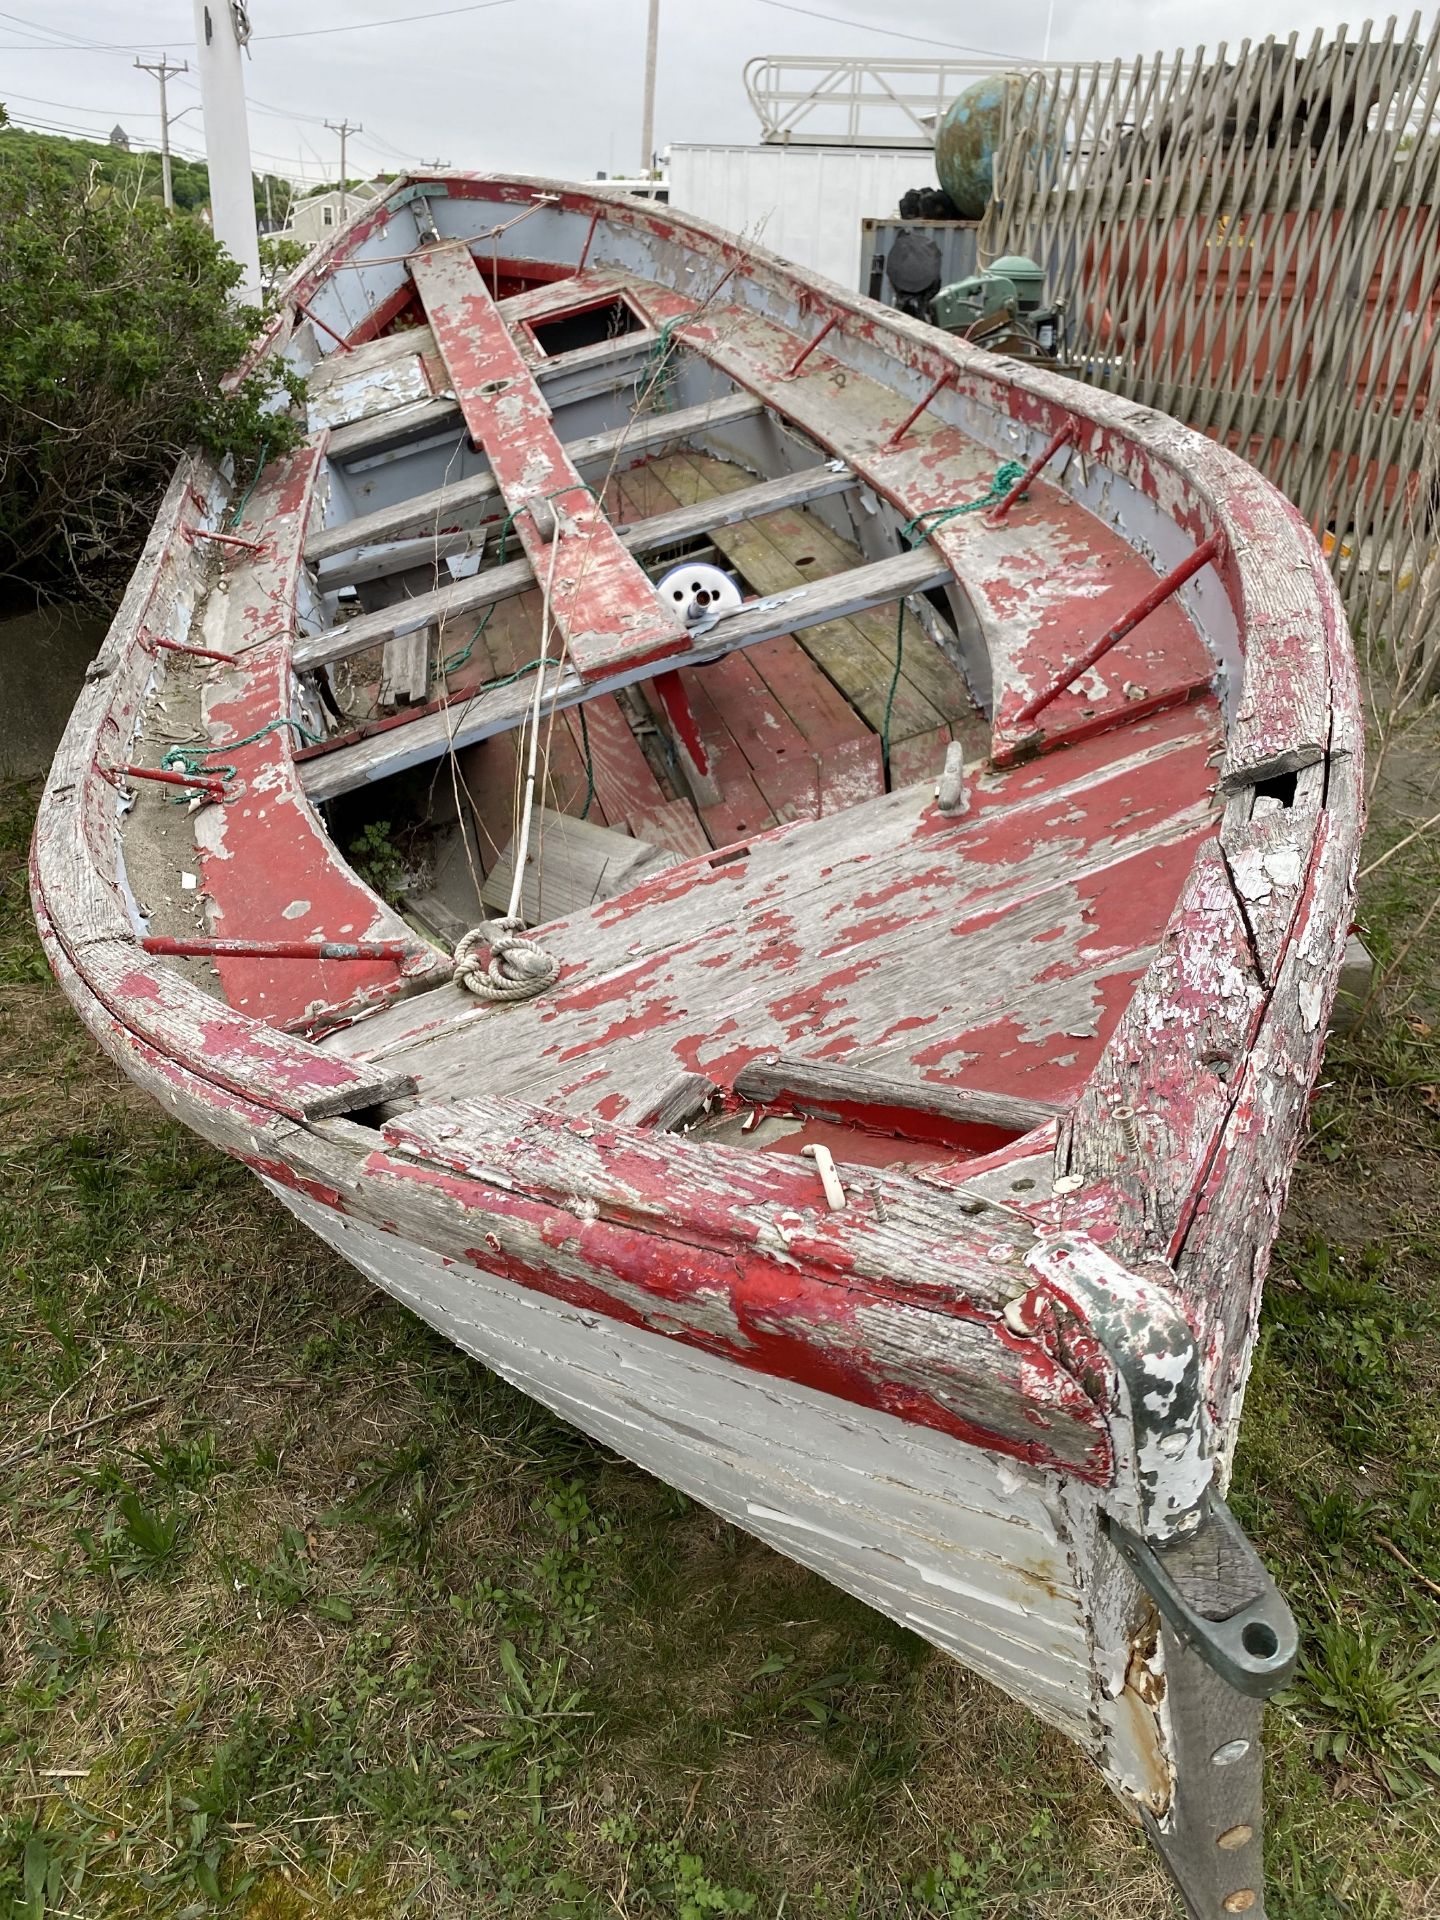 12' Antique Wood Row Boat